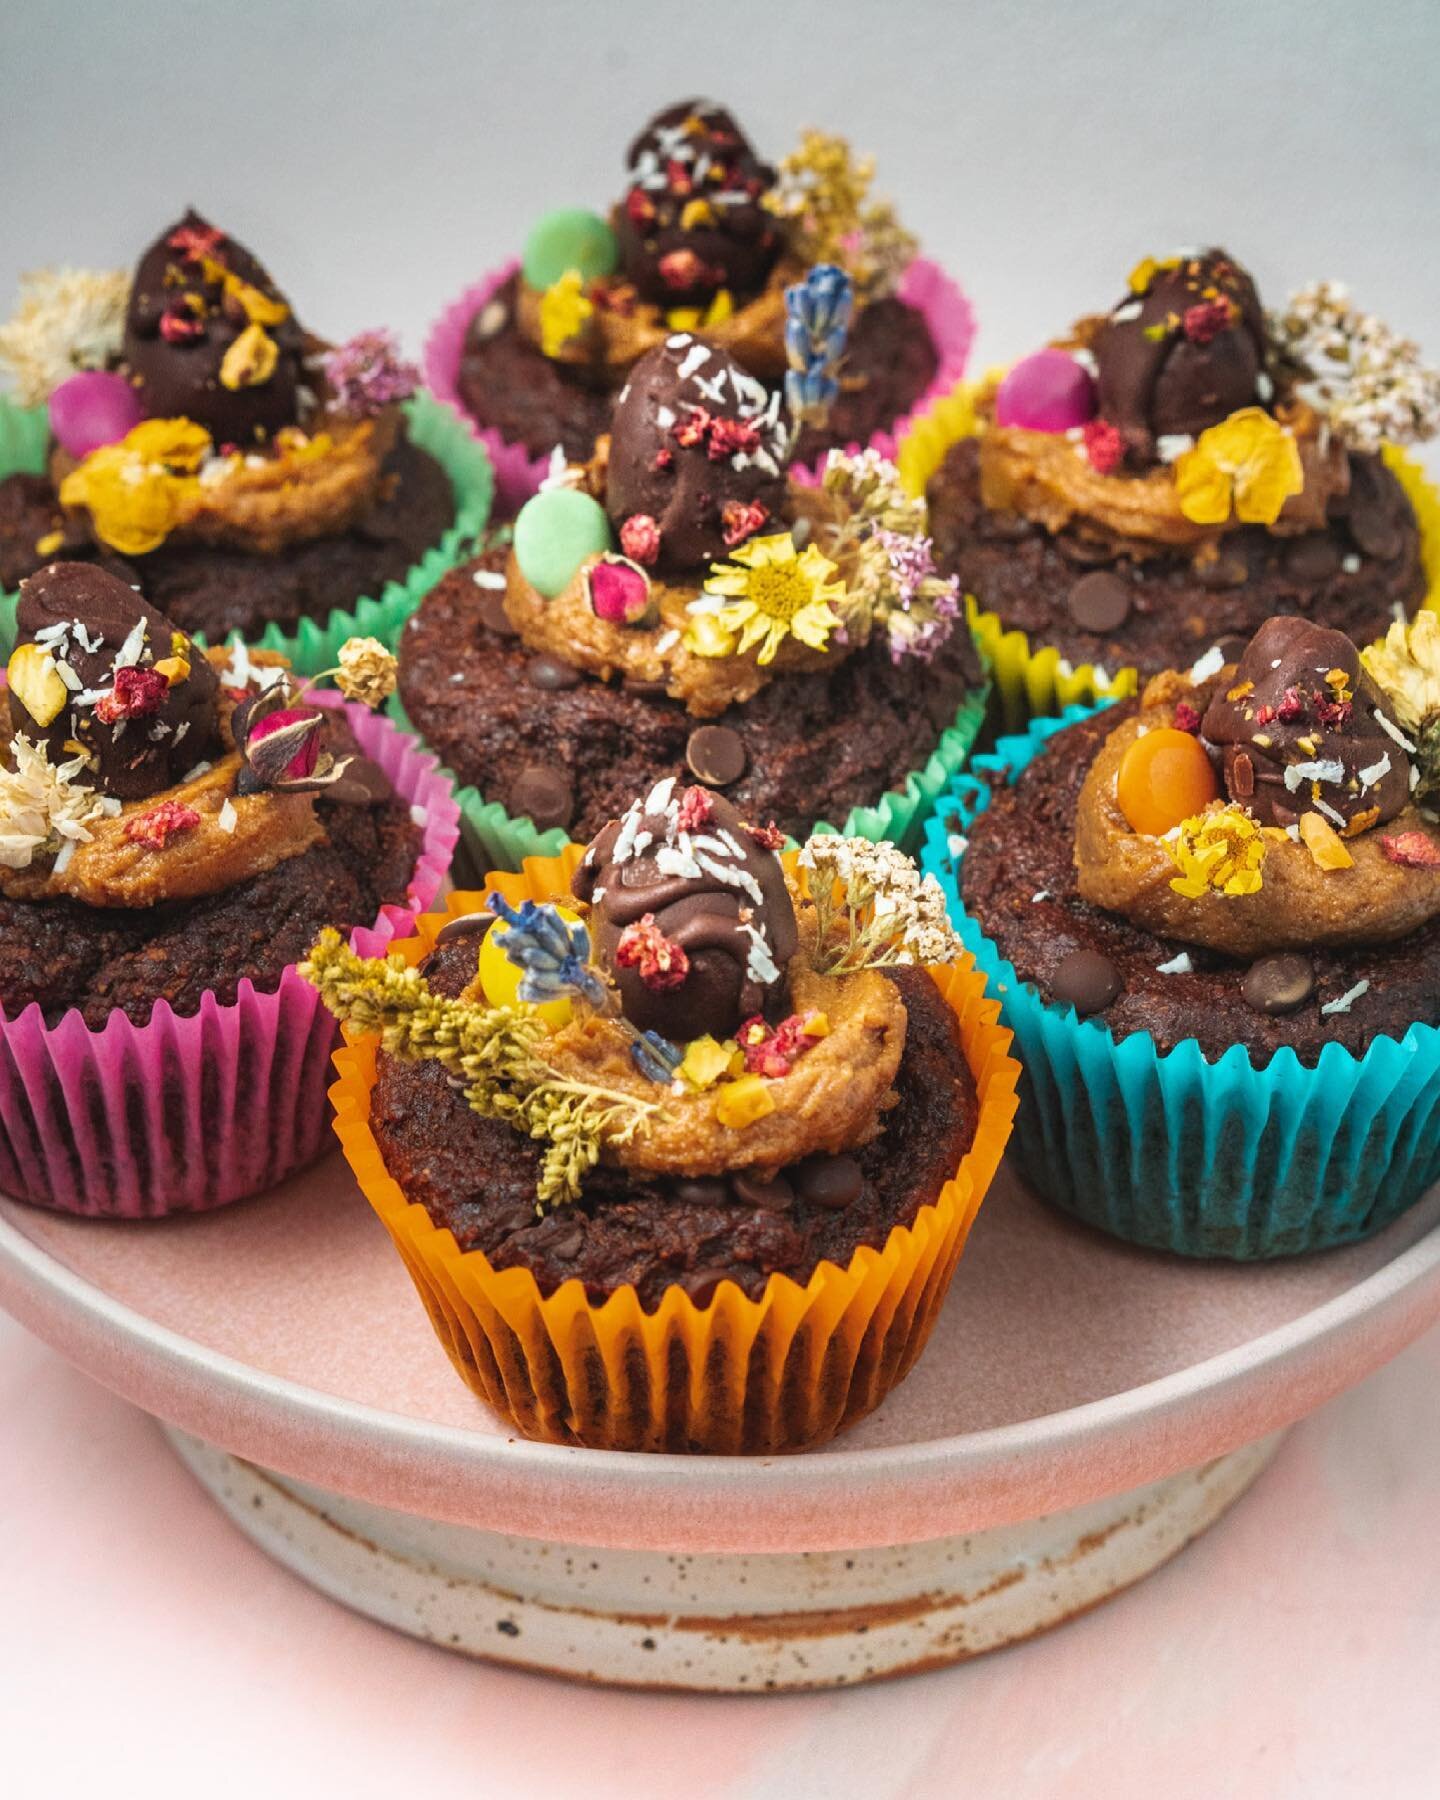 Free Easter Baking Cook-Along! Sunday 4th April 11am 🌸🐥💕💫

Join me this Sunday for a lovely chocolatey Insta Live cook-along where we&rsquo;ll make:

* Chocolate muffins
* Mini chocolate eggs to go on top
* A two minute easy peasy frosting 

A bi